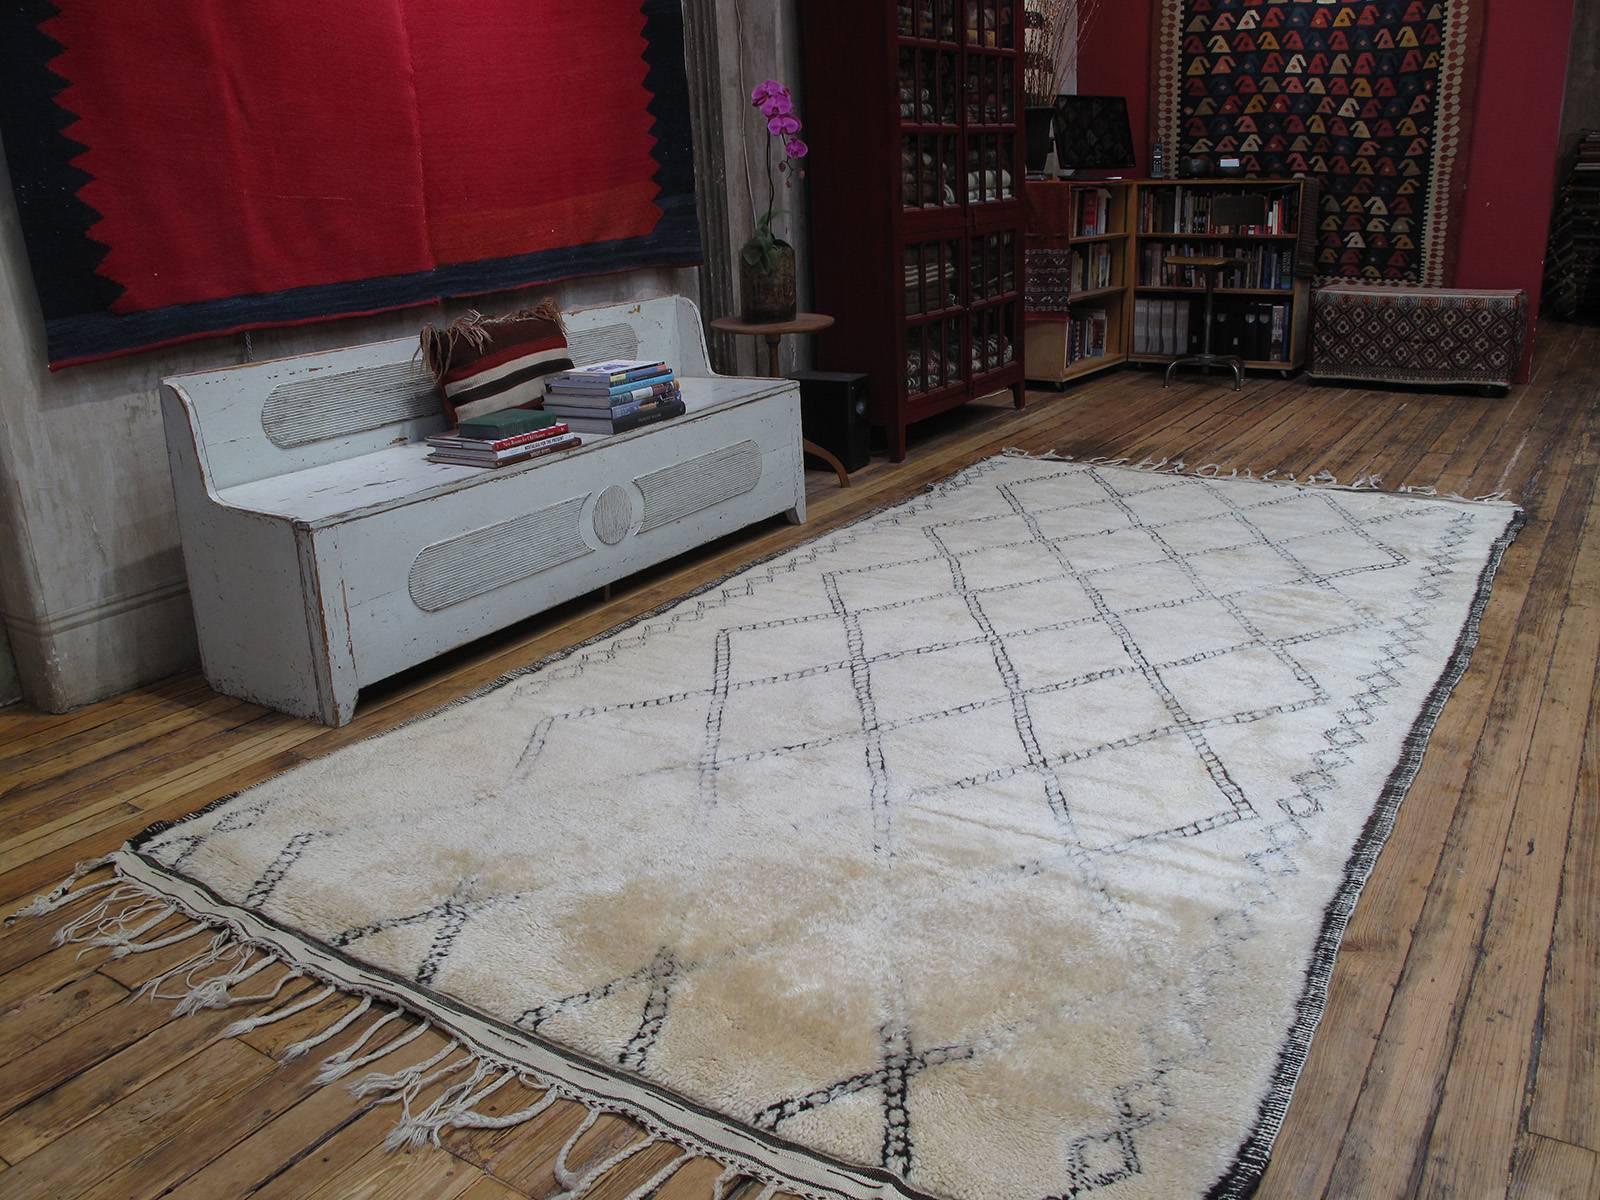 A beautiful old Moroccan Berber carpet by the Beni Ouarain tribes of the middle Atlas mountains. A relatively recent but authentic and high quality example with an elegant rendition of the classic diamond grid design and excellent quality wool.